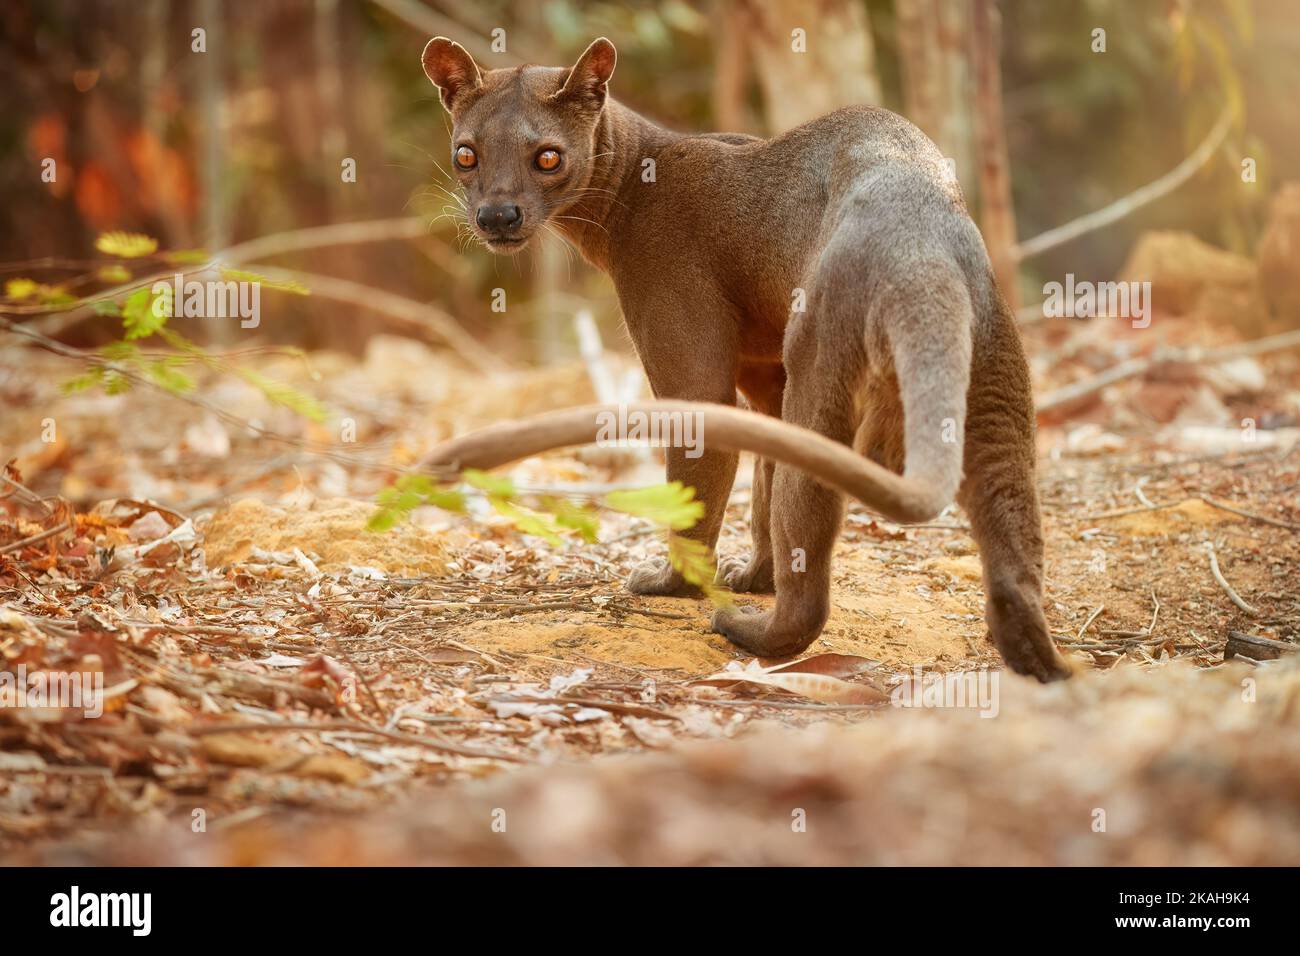 Madagascar fossa. Apex predator, lemur hunter. General view, fossa male with long tail in natural habitat. Shades of brown and orange. Endangered wild Stock Photo